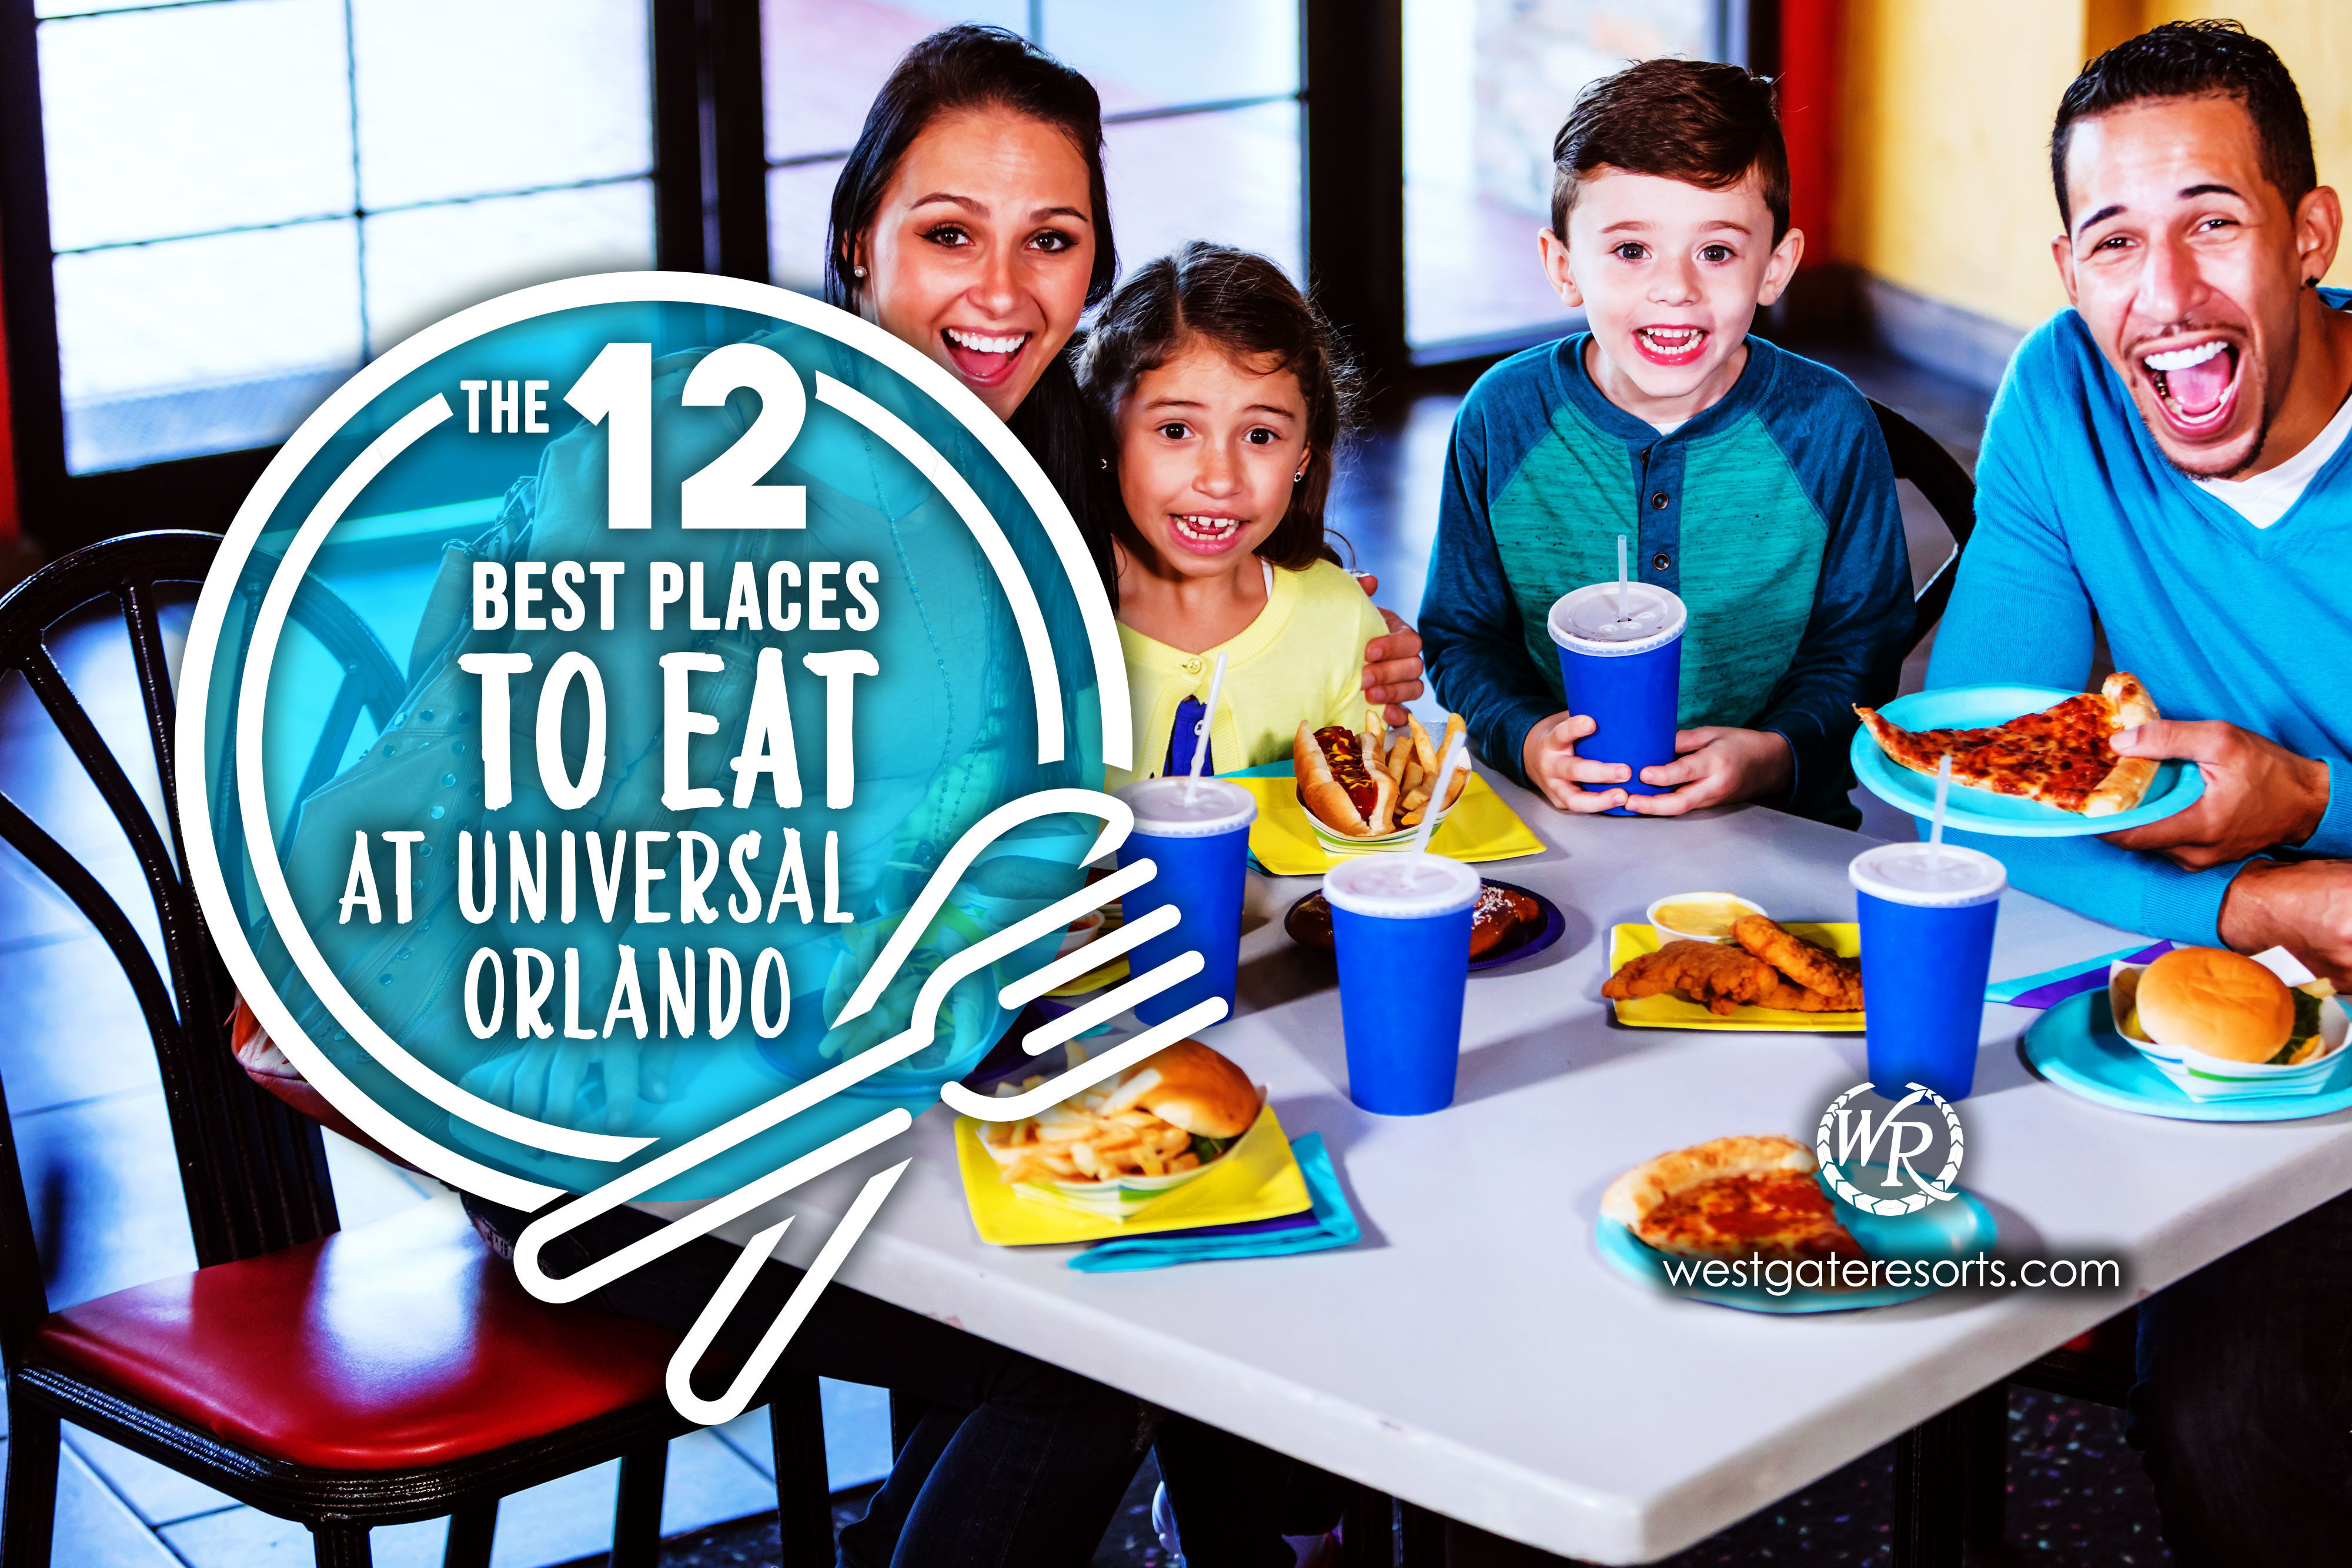 The 12 Best Places to Eat at Universal Orlando